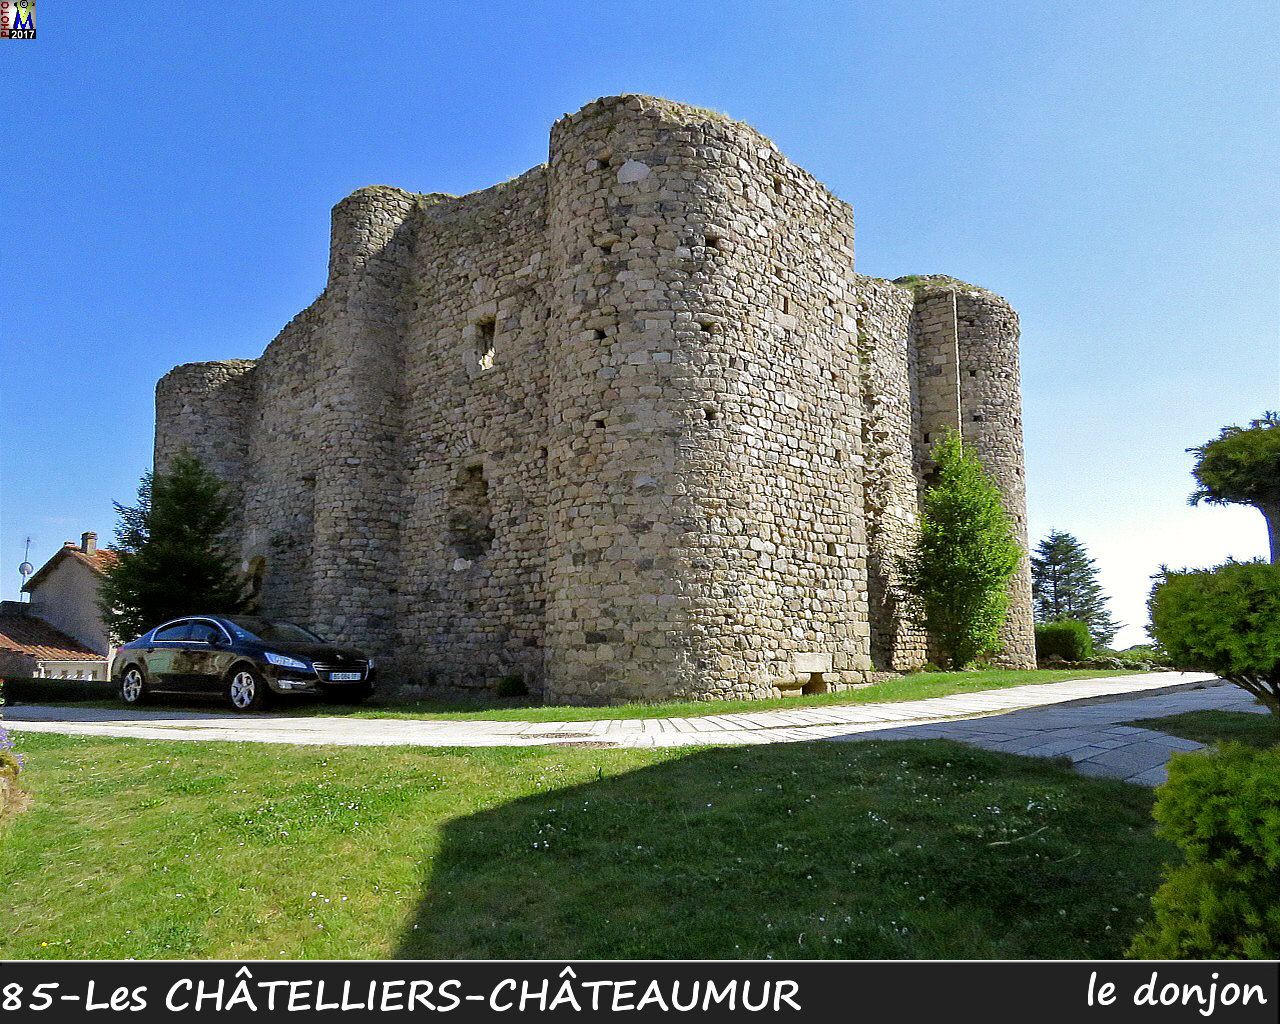 85CHATELLIERS-CHATEAUMUR_chateau_1002.jpg